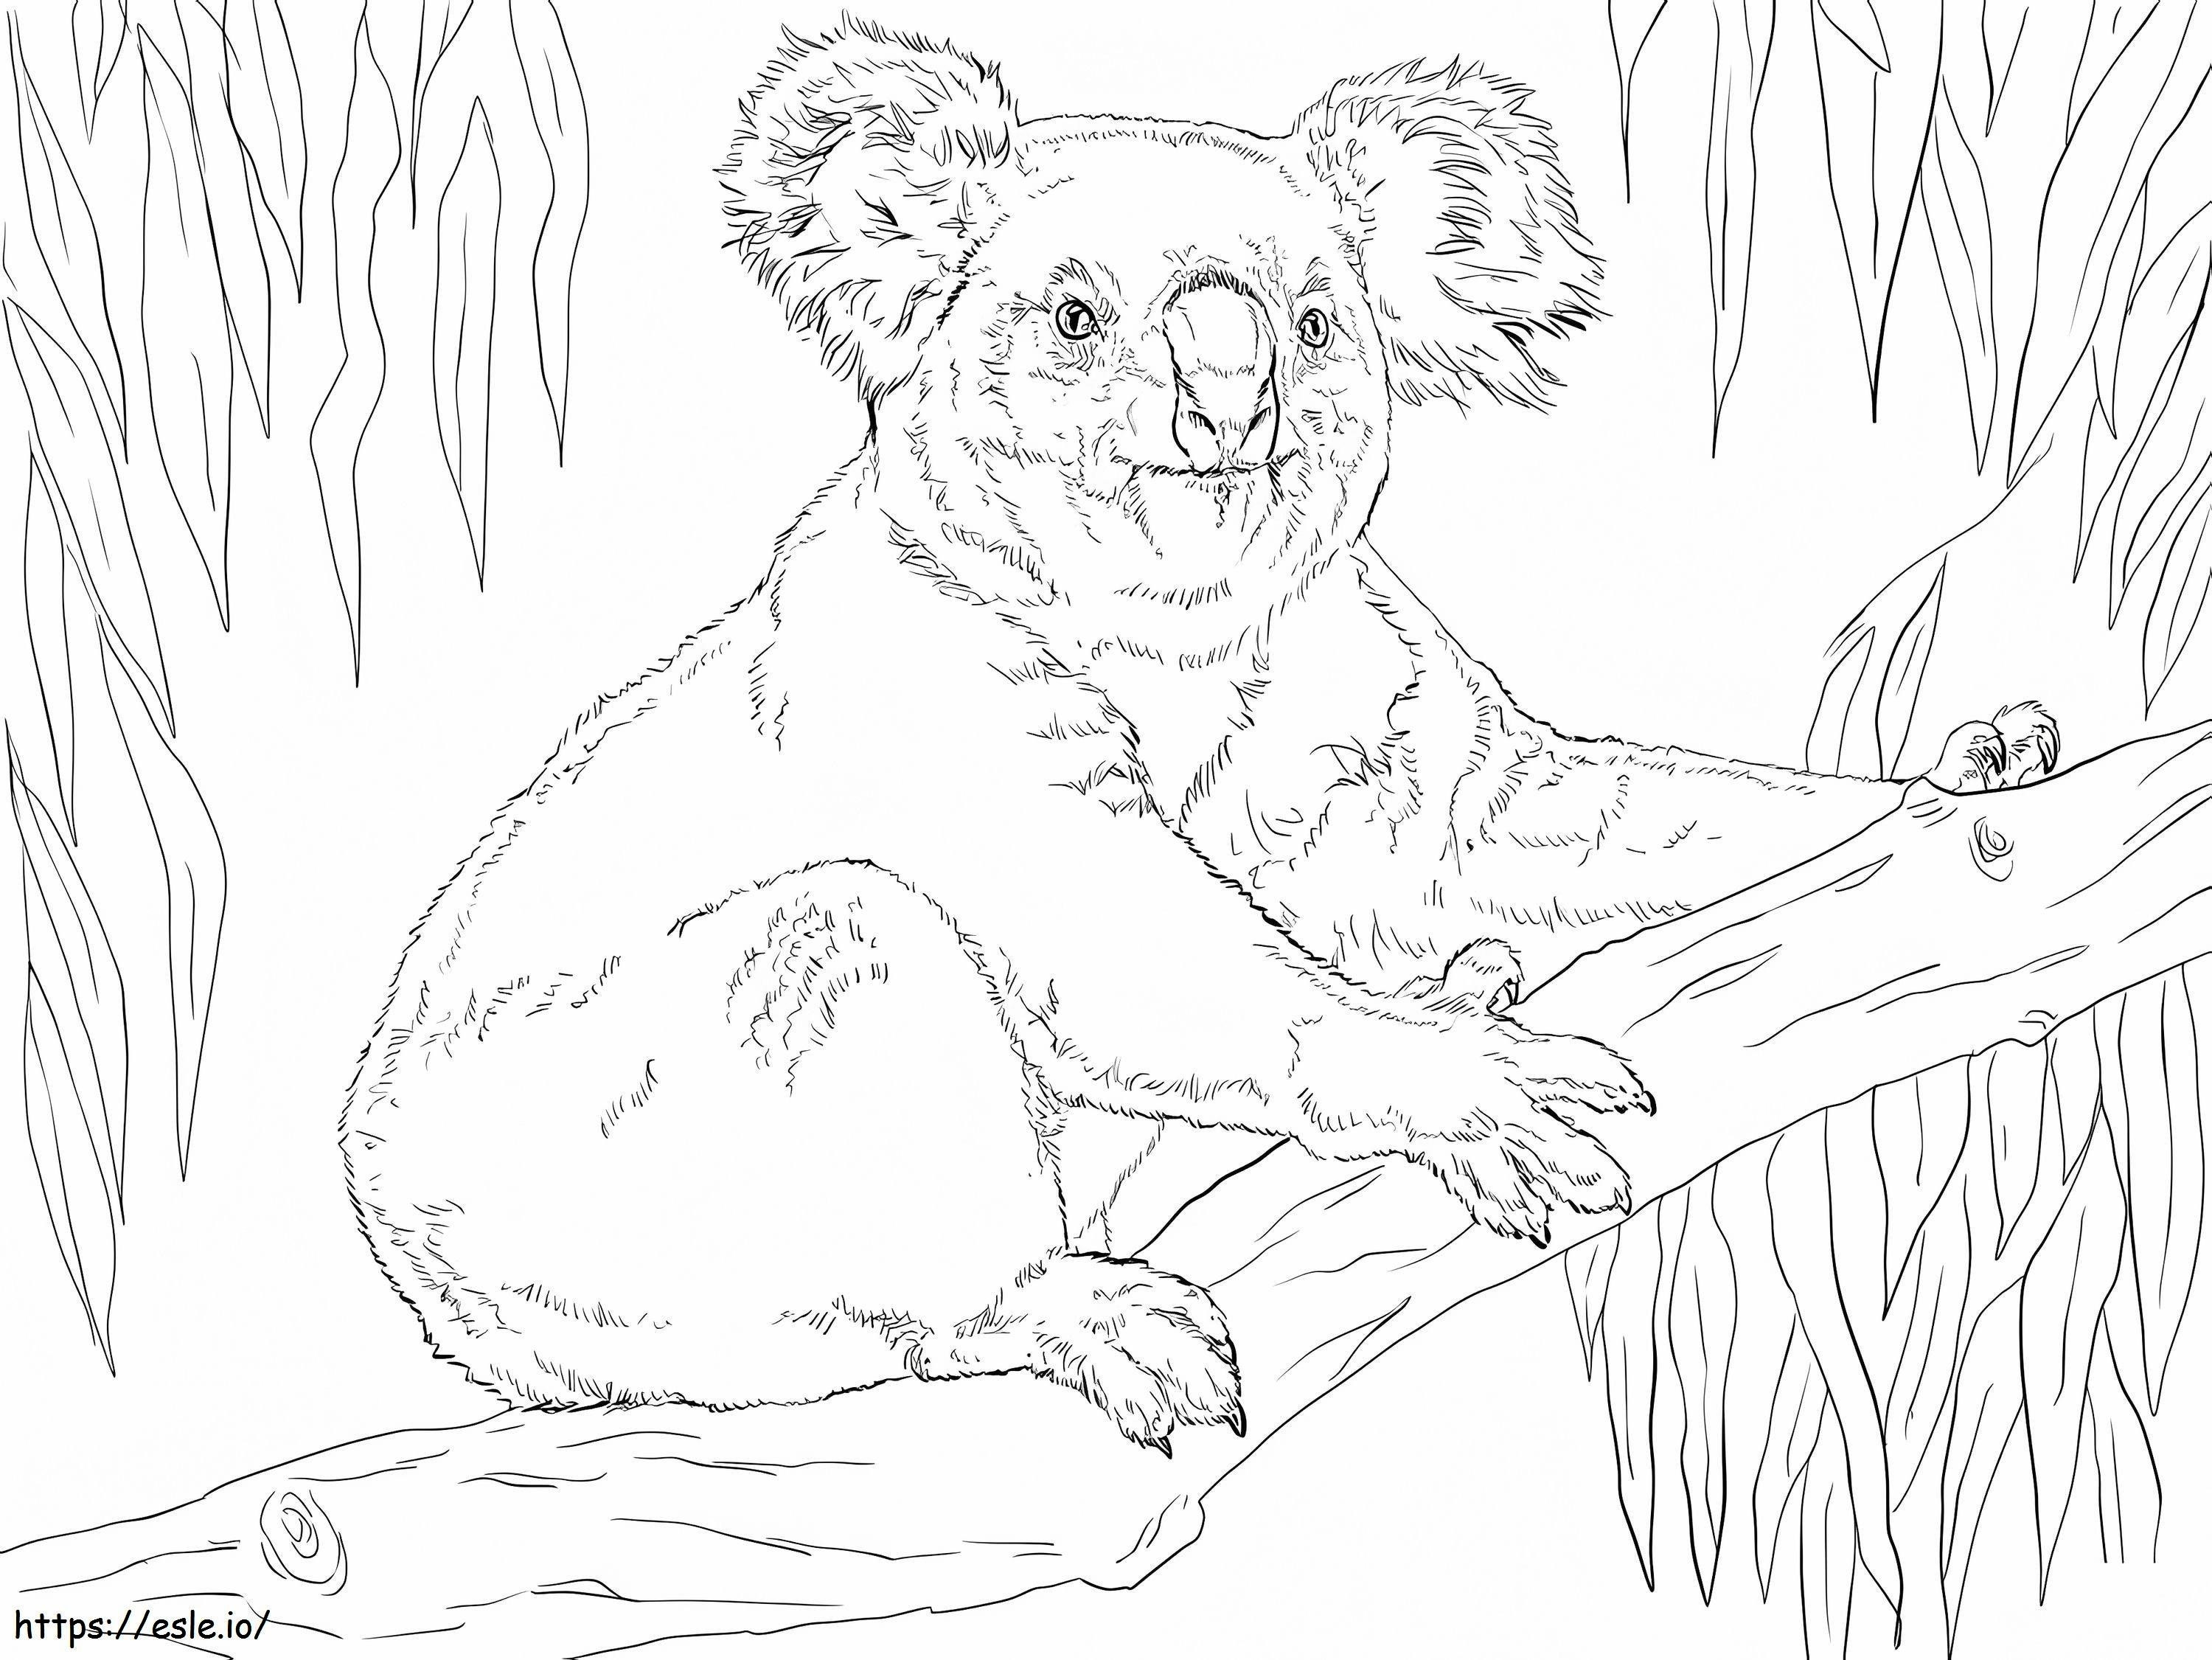 1594343602 Koala Sits On A Branch coloring page